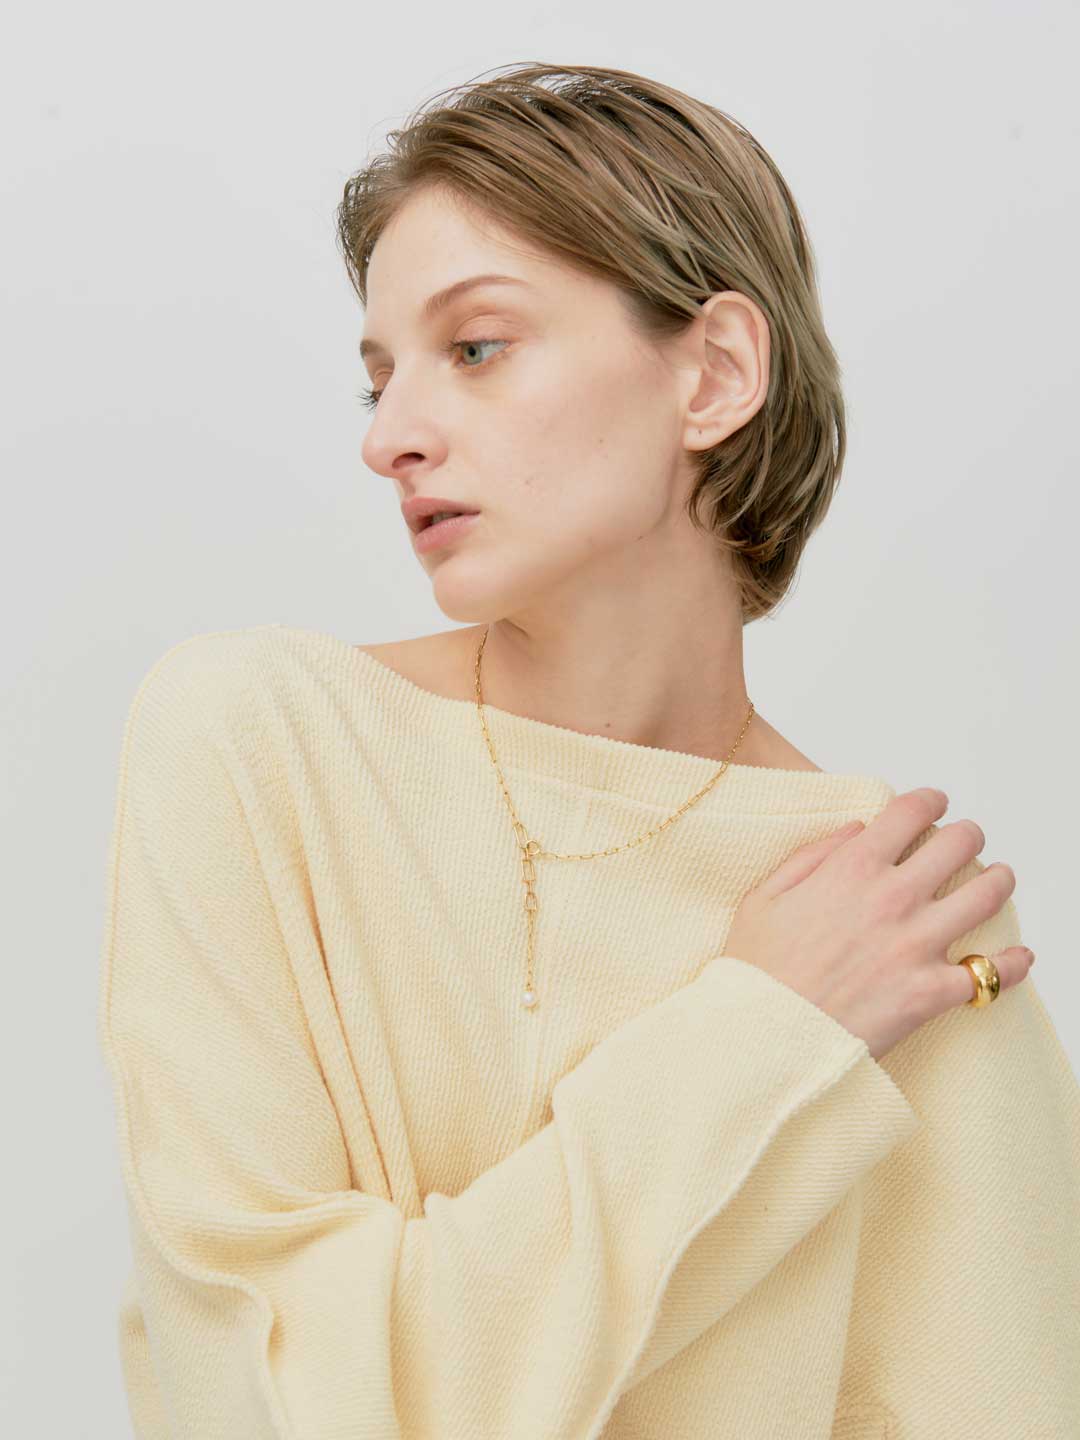 Boat-Neck Basque Top - Light Yellow